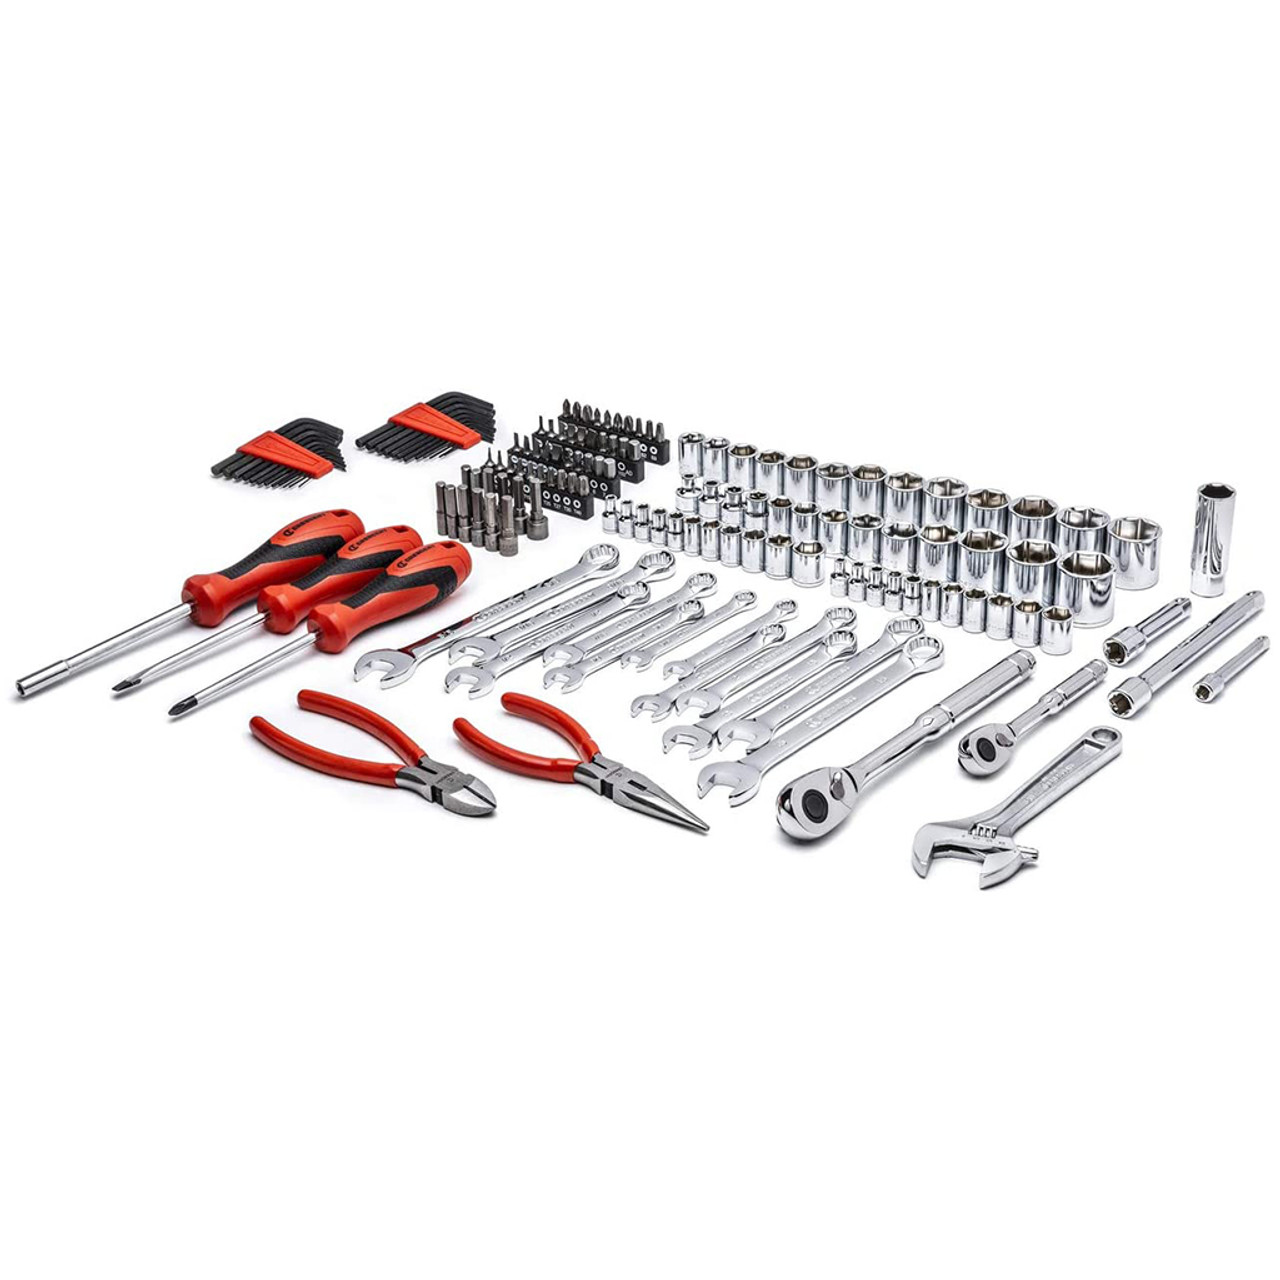 150-Piece Professional Tool Set Midwest Technology